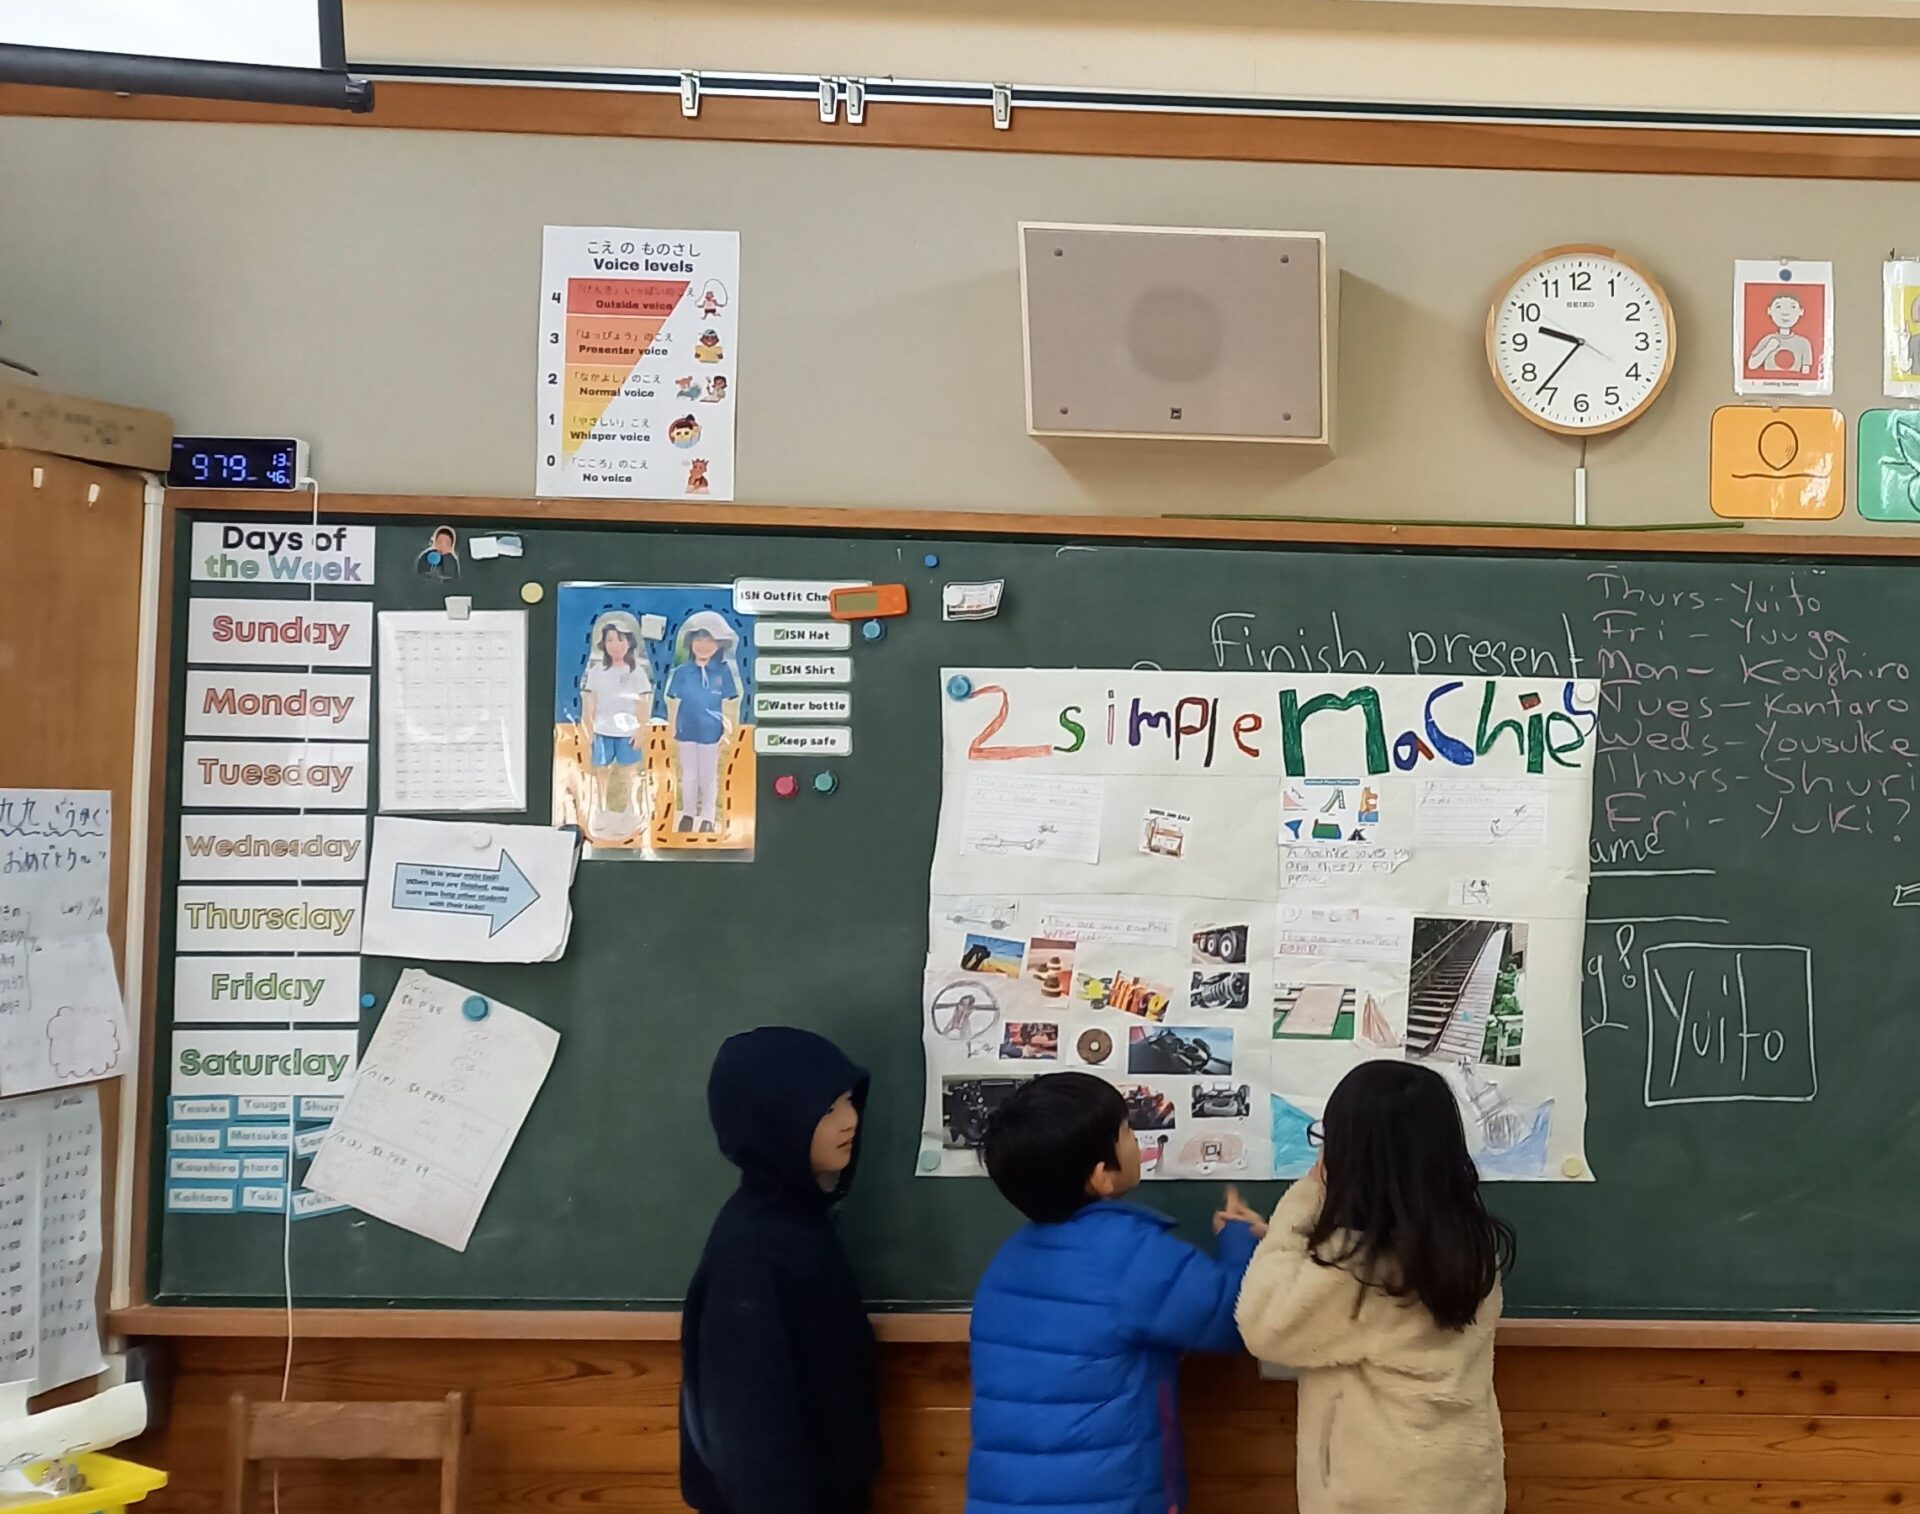 Grade 2 students present their poster to the class.